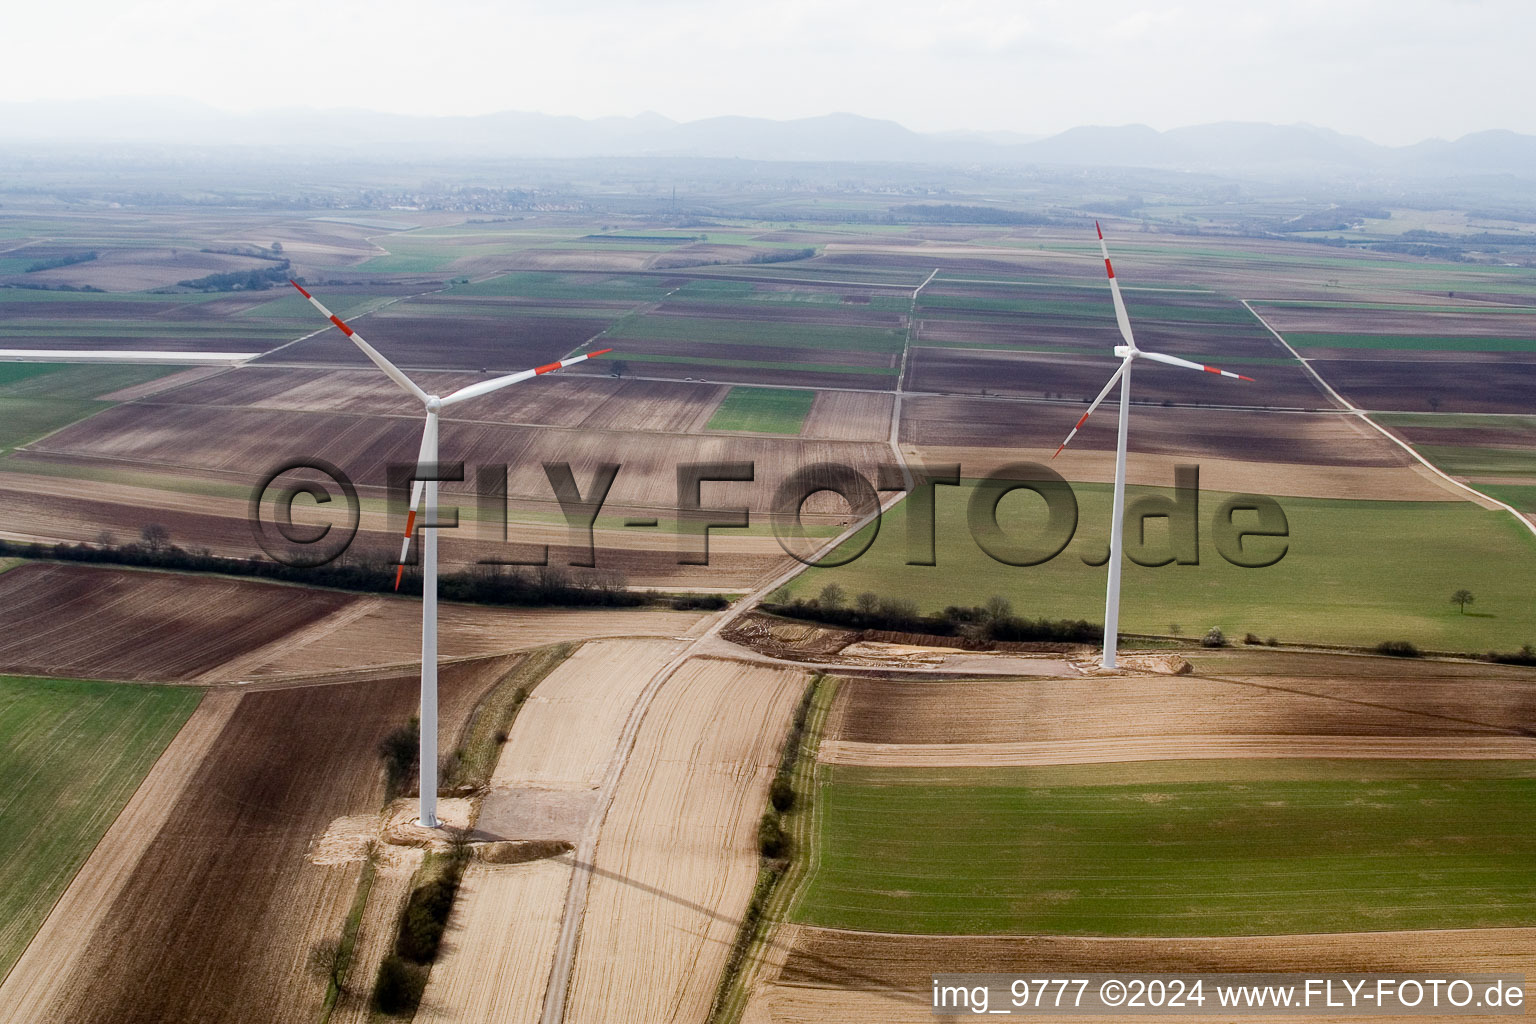 Wind turbines in Offenbach an der Queich in the state Rhineland-Palatinate, Germany from the plane